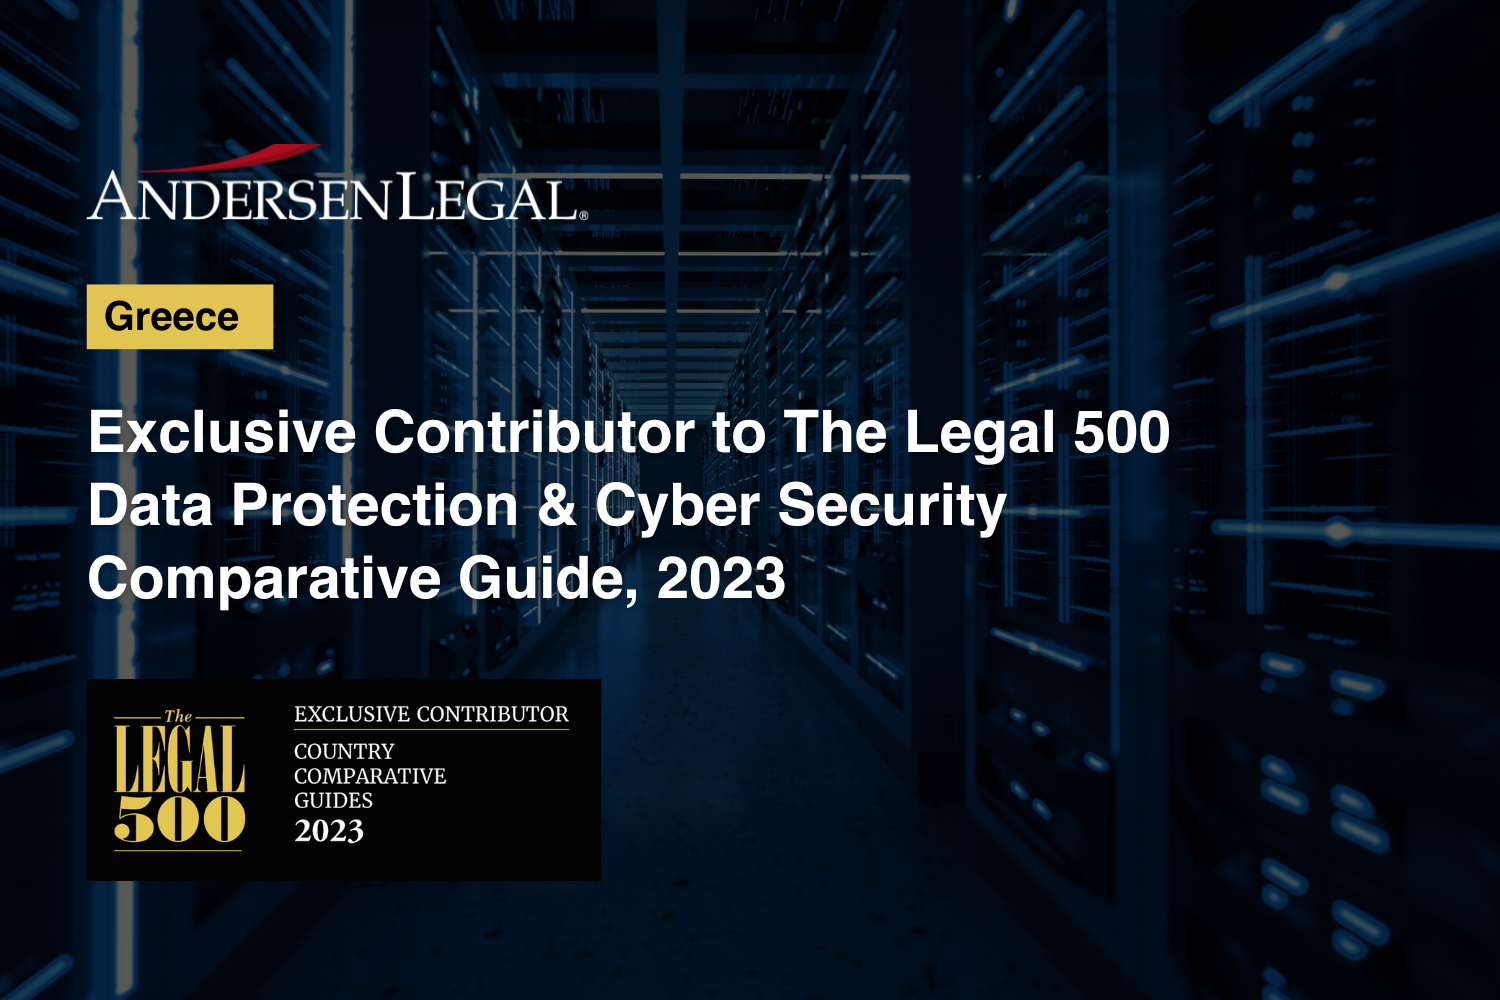 Andersen Legal: Exclusive contributor to The Legal 500 Data Protection and Cyber Security Comparative Guide, 2023